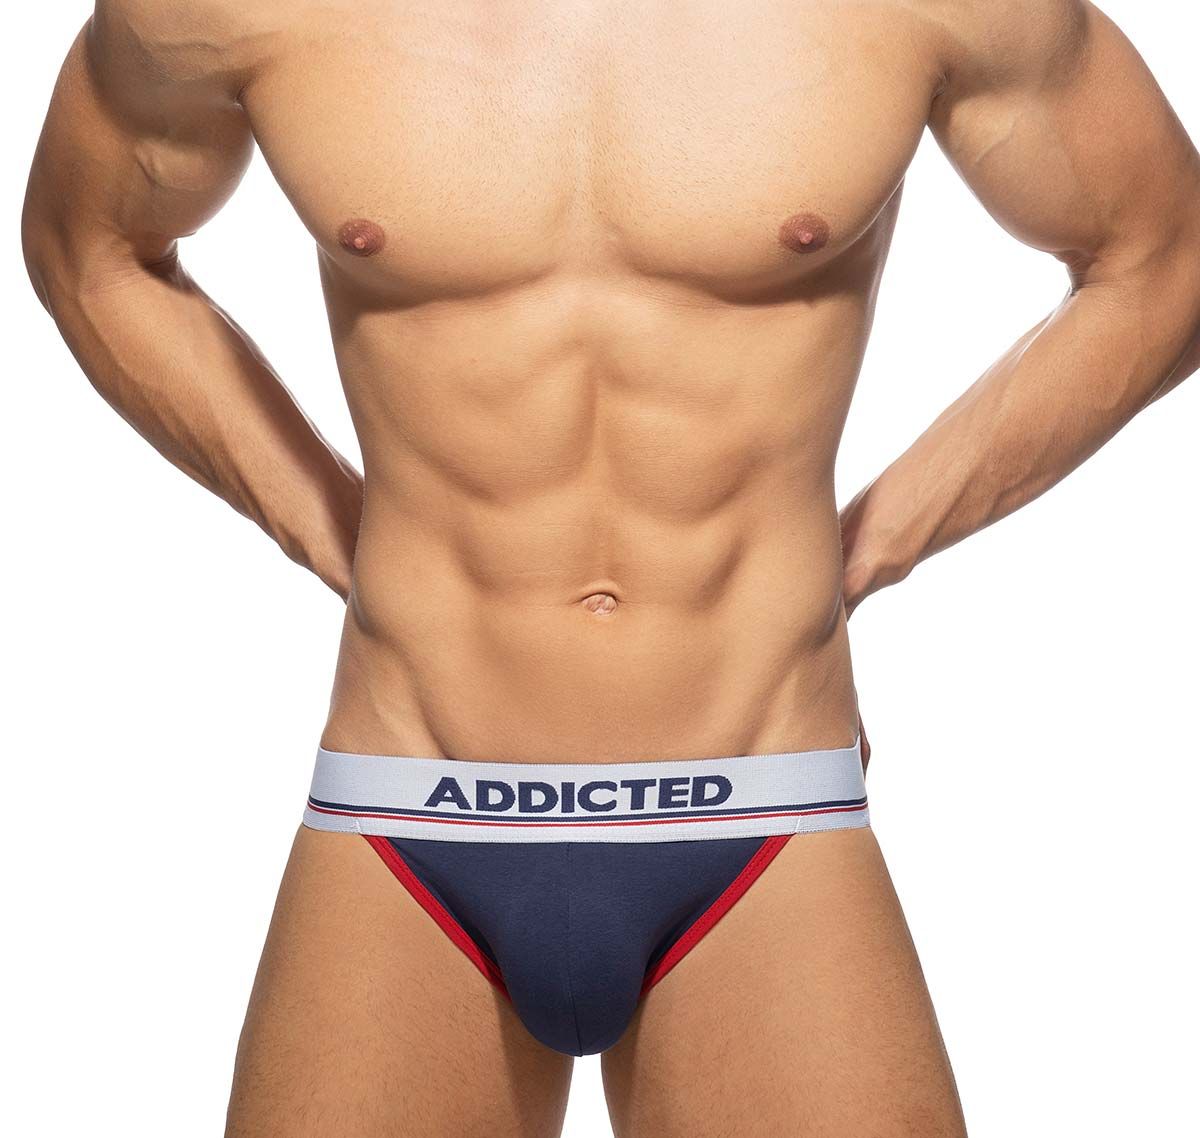 Addicted Pack of 3 Jockstraps TOMMY 3 PACK JOCK AD1010P, white/red/navy blue